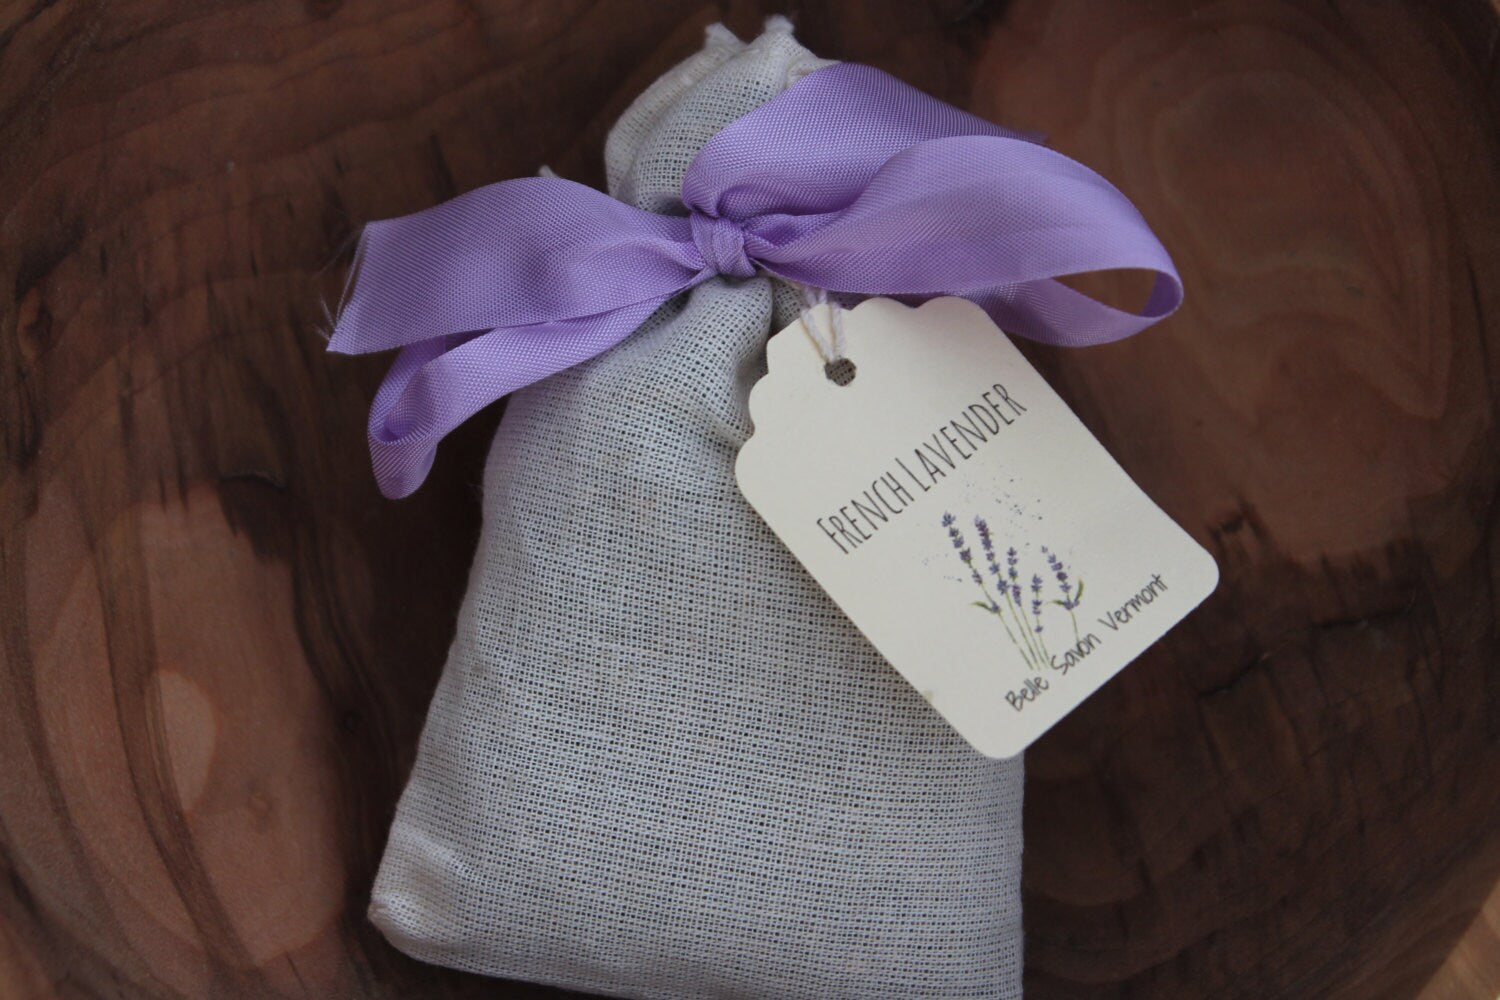 French Lavender Sachets with Letterpress Hangtag-Favors-Gifts-Home Care- Belle Savon Vermont